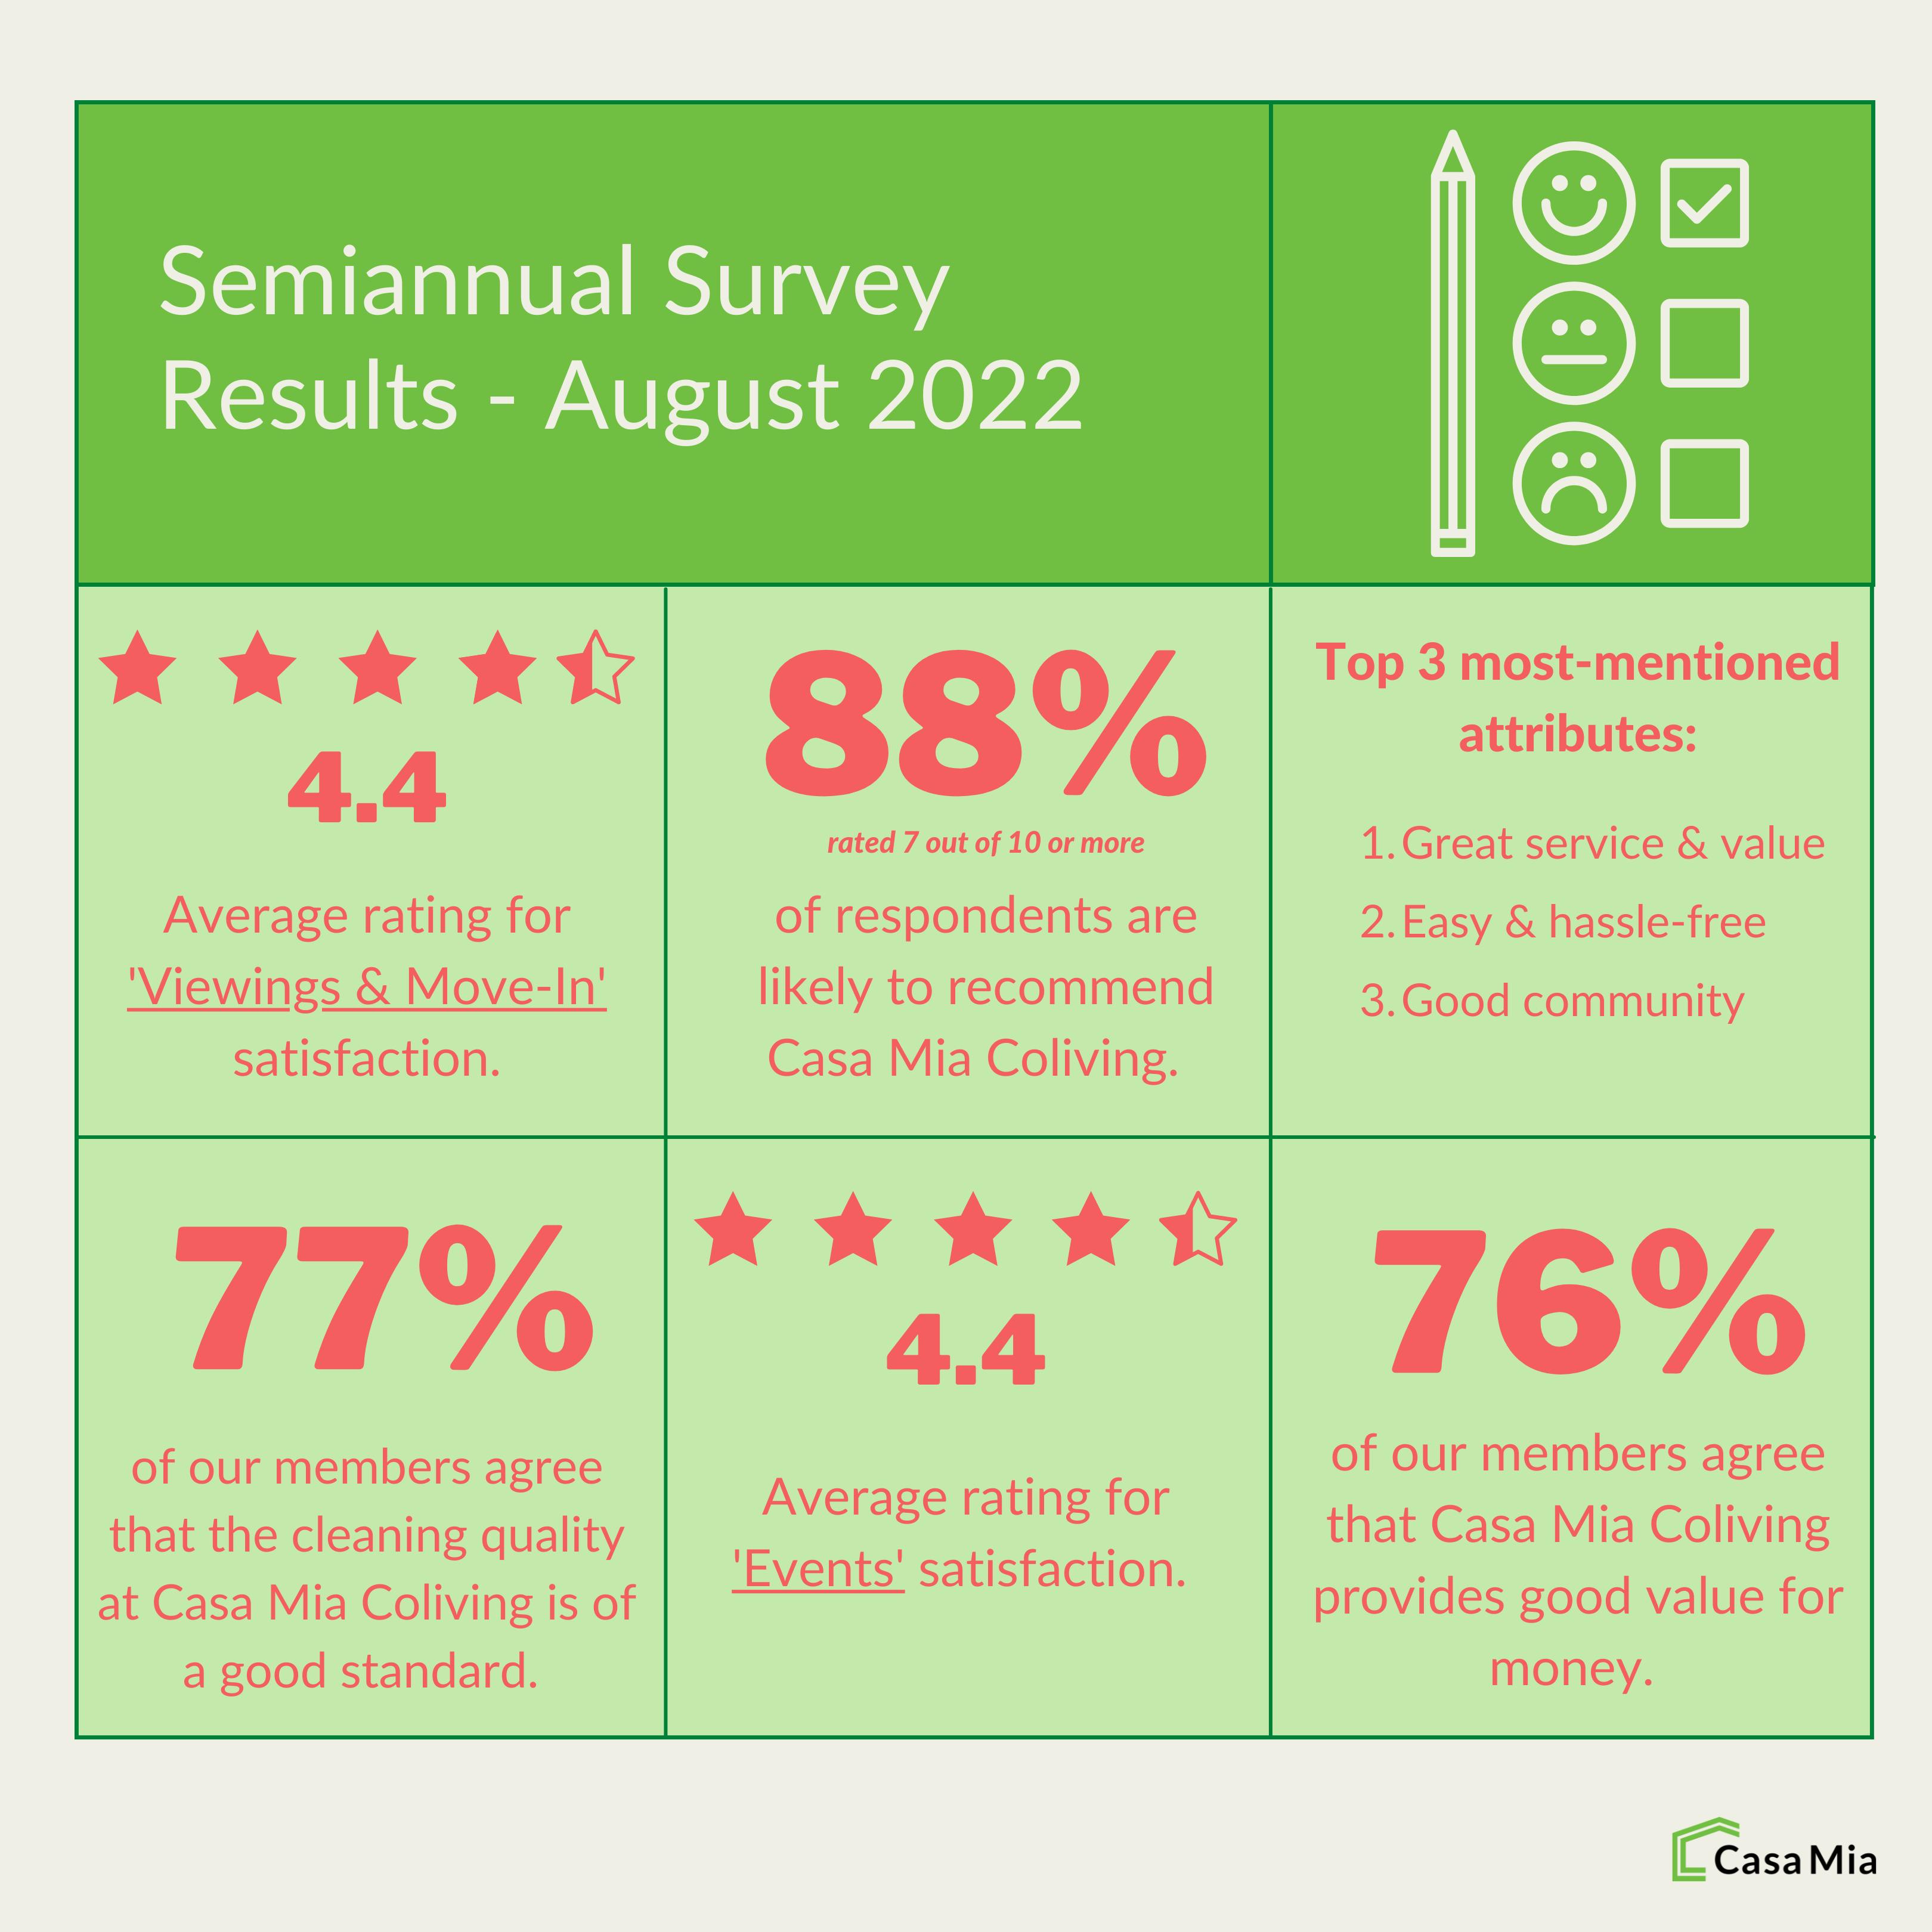 semiannual survey results